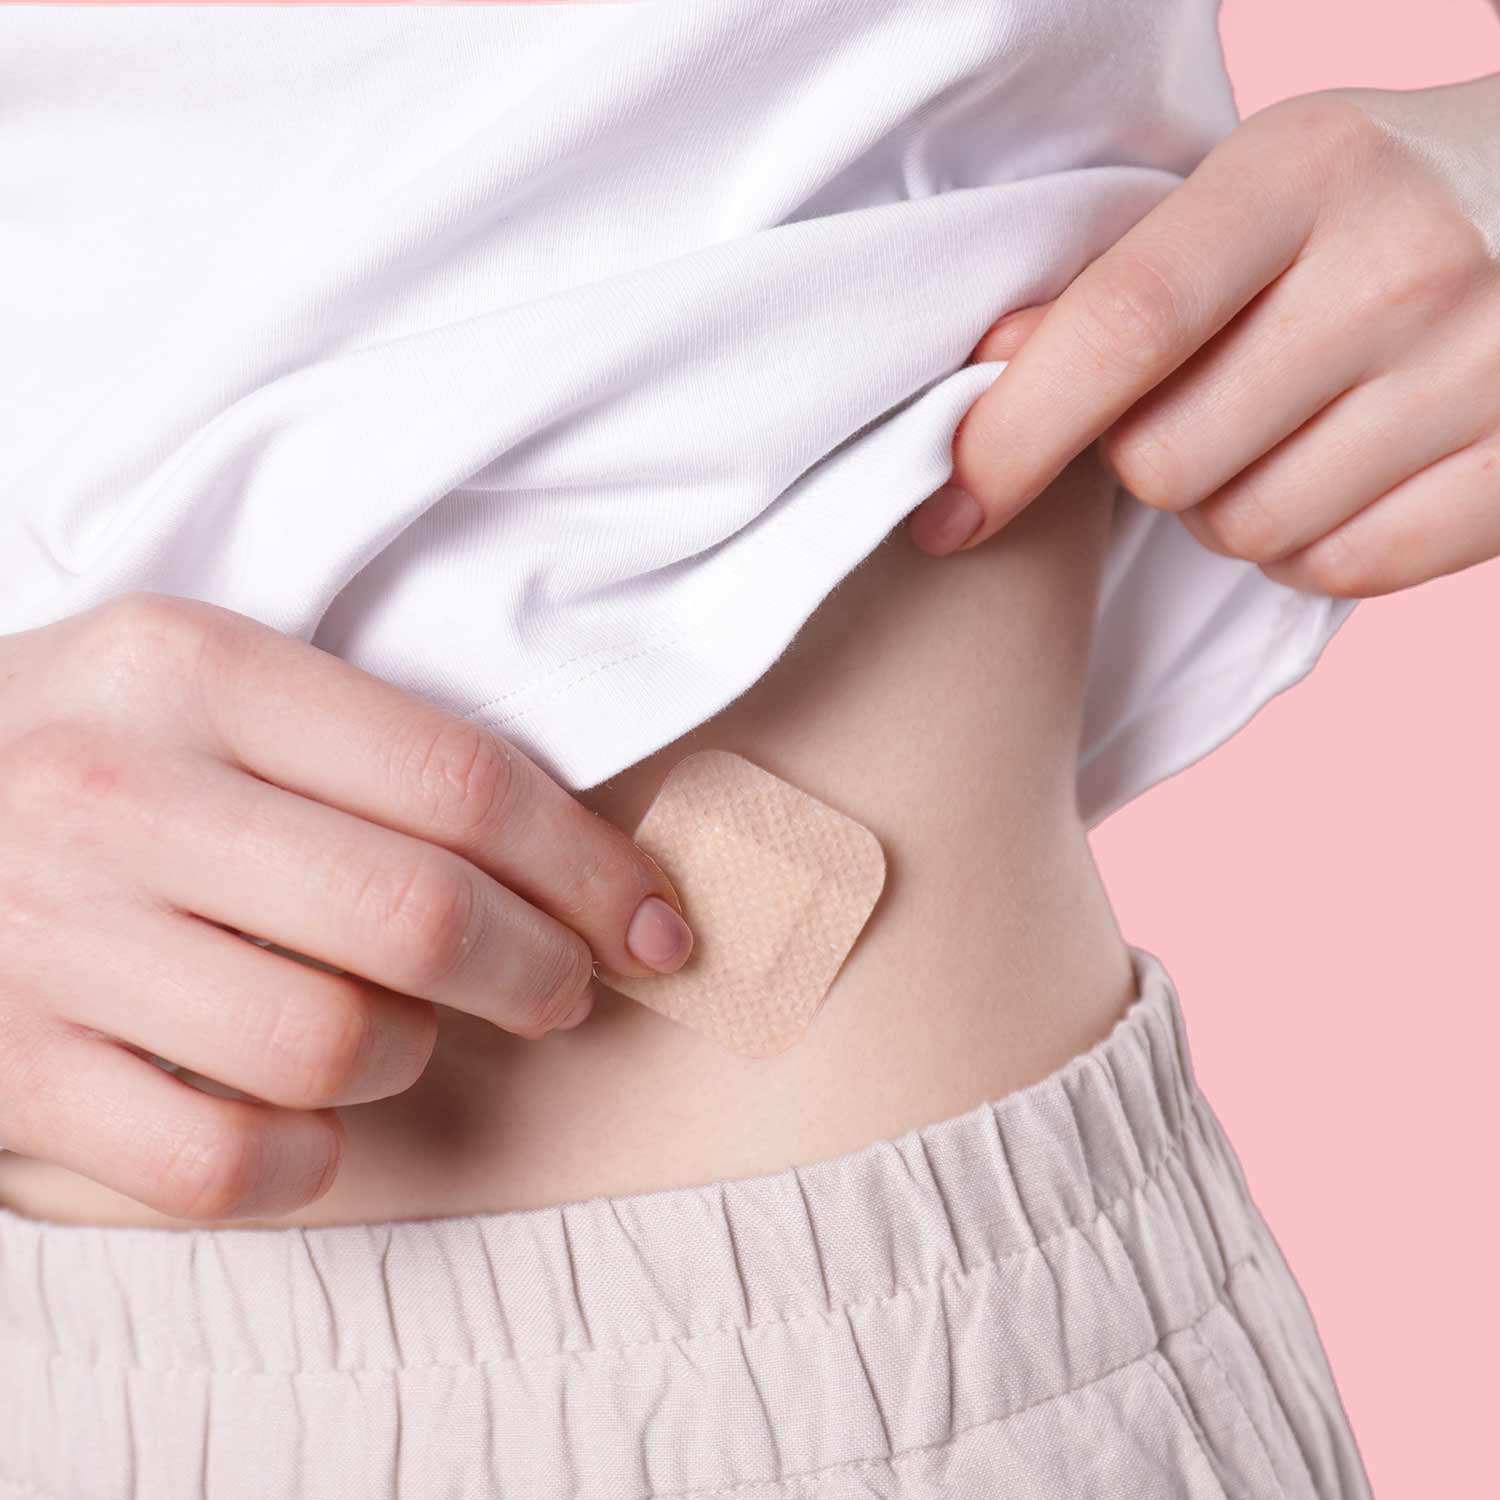 a woman in neutral clothing applying a birth control patch to her stomach against a pink background